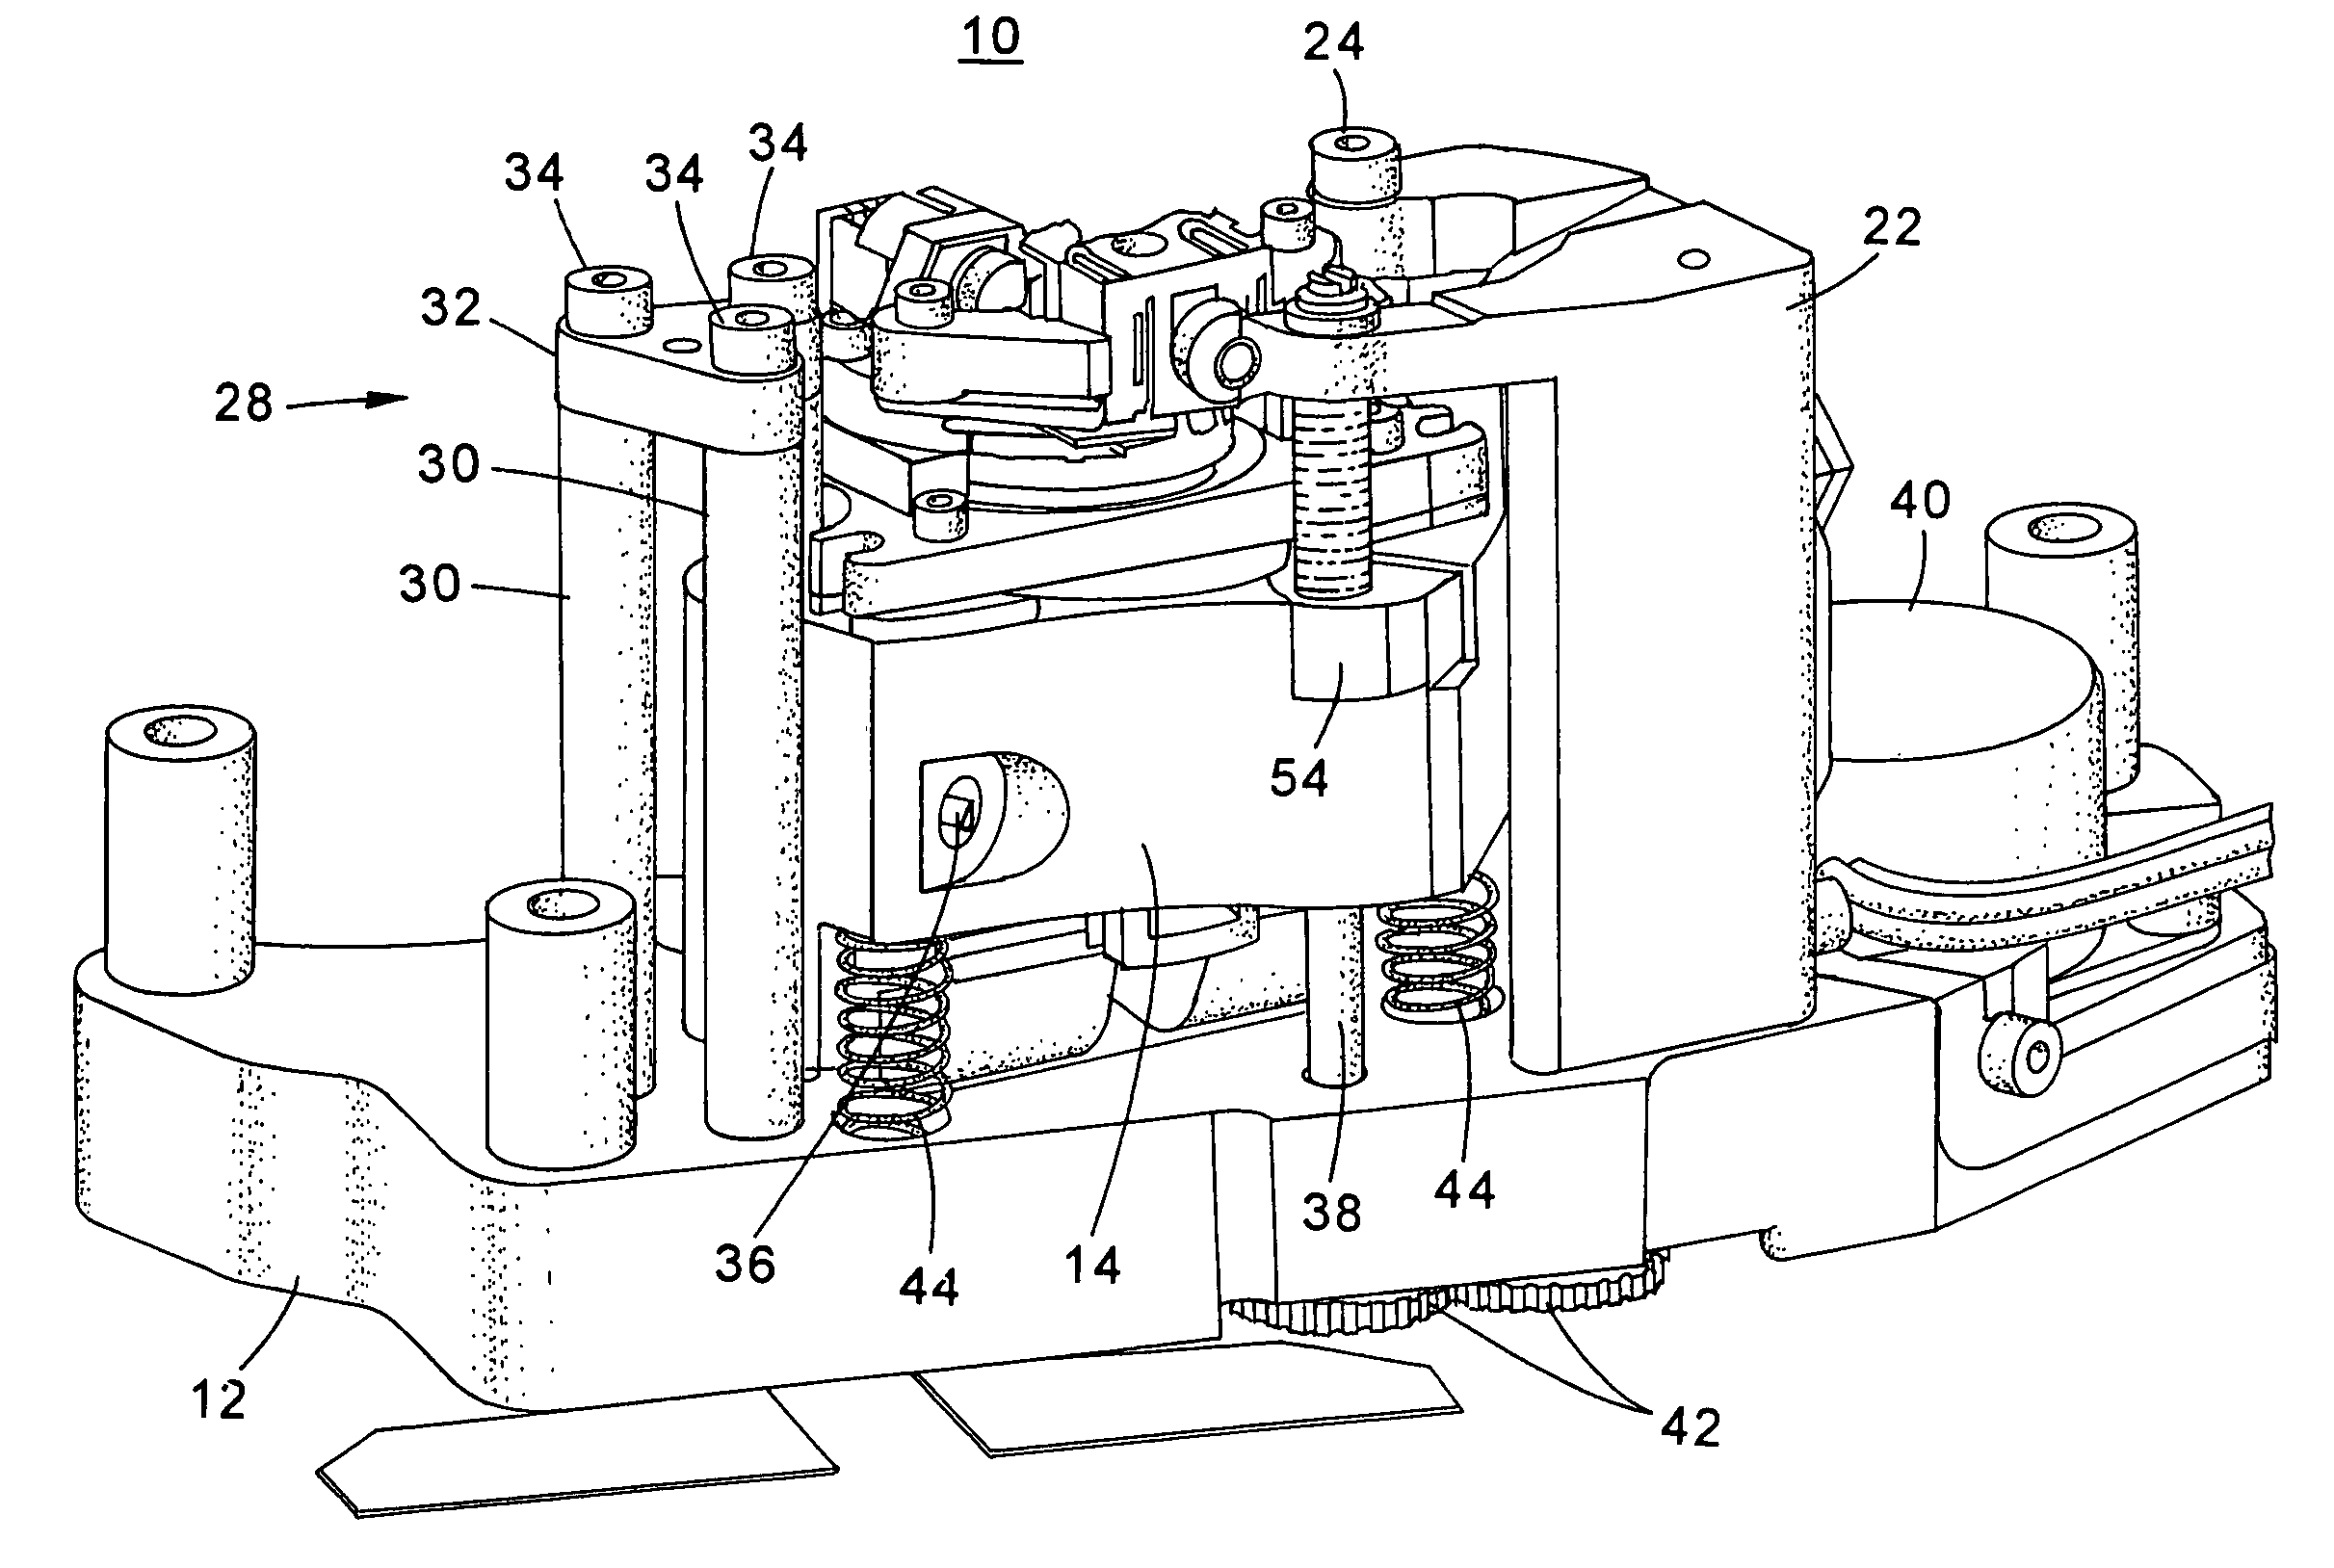 Head actuator assembly for a tape drive